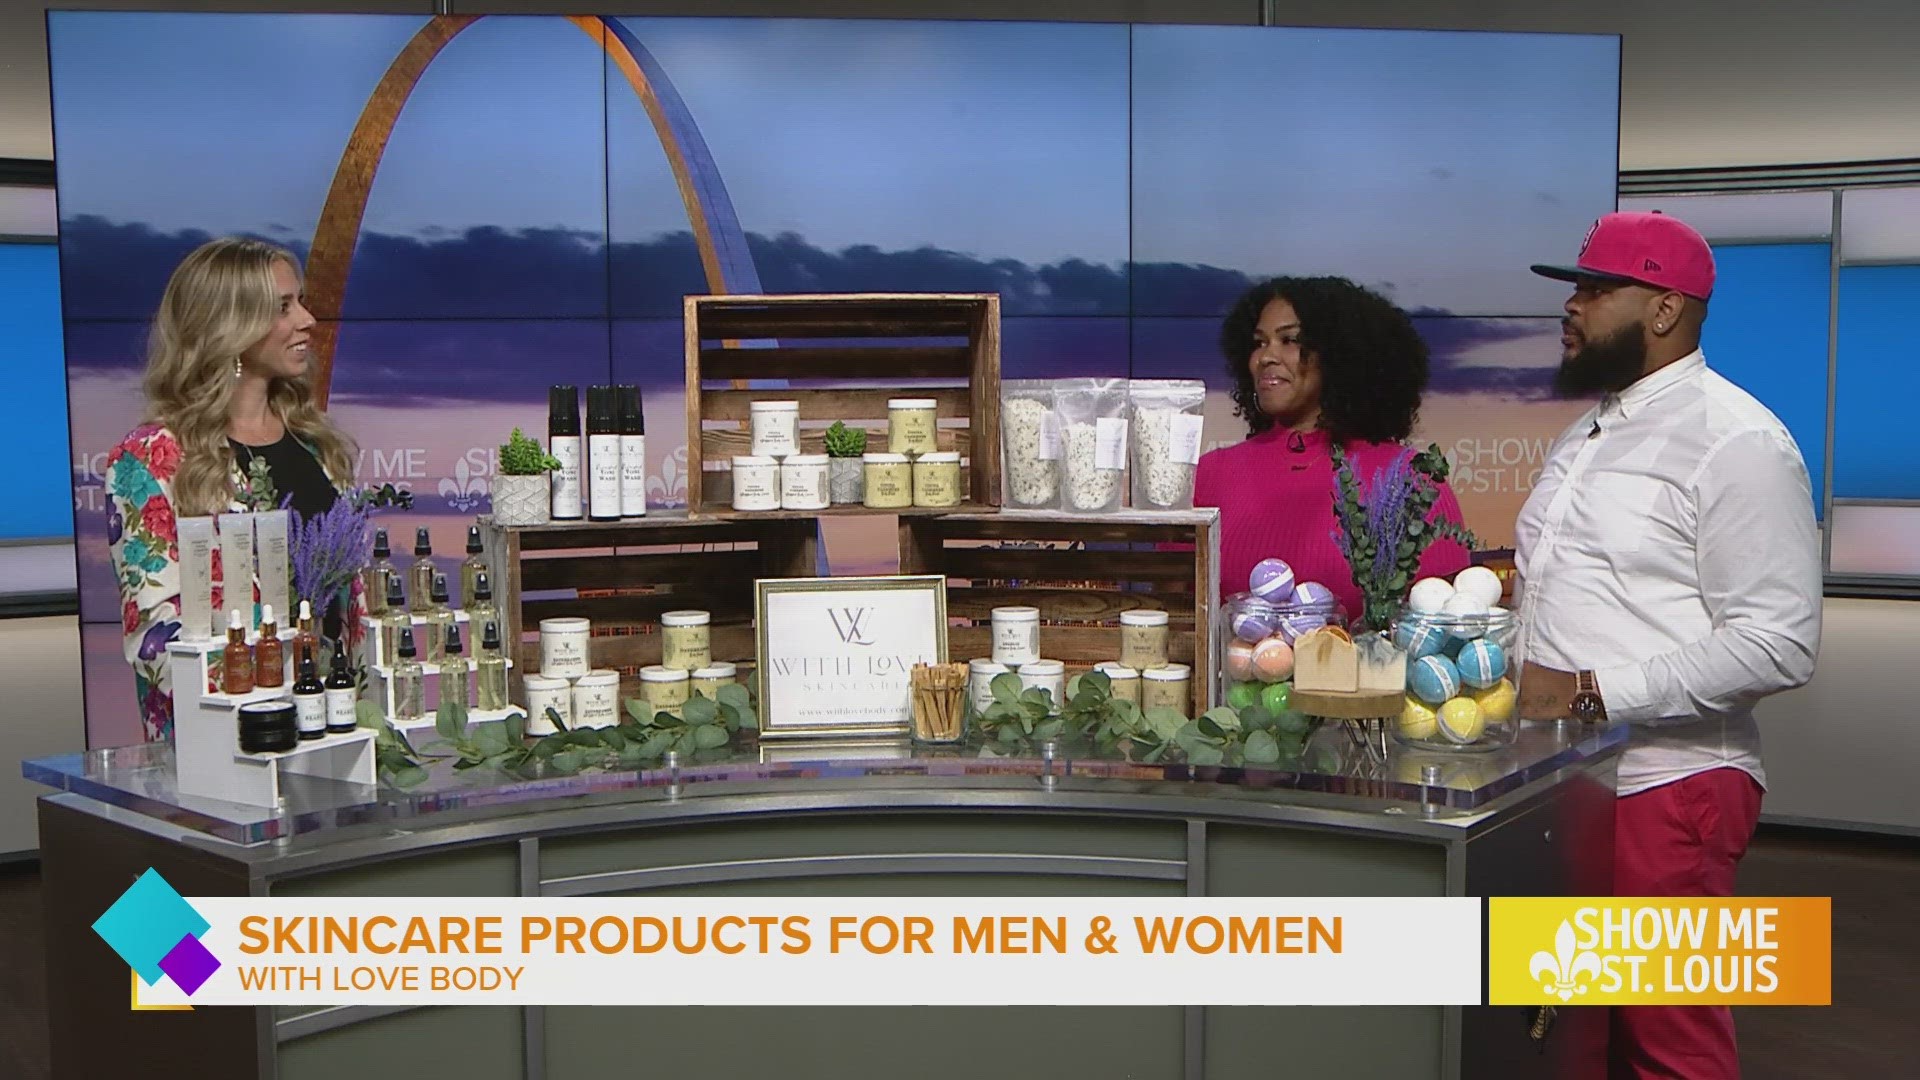 Friday morning, With Love joined Mary in studio to share about their skincare business.